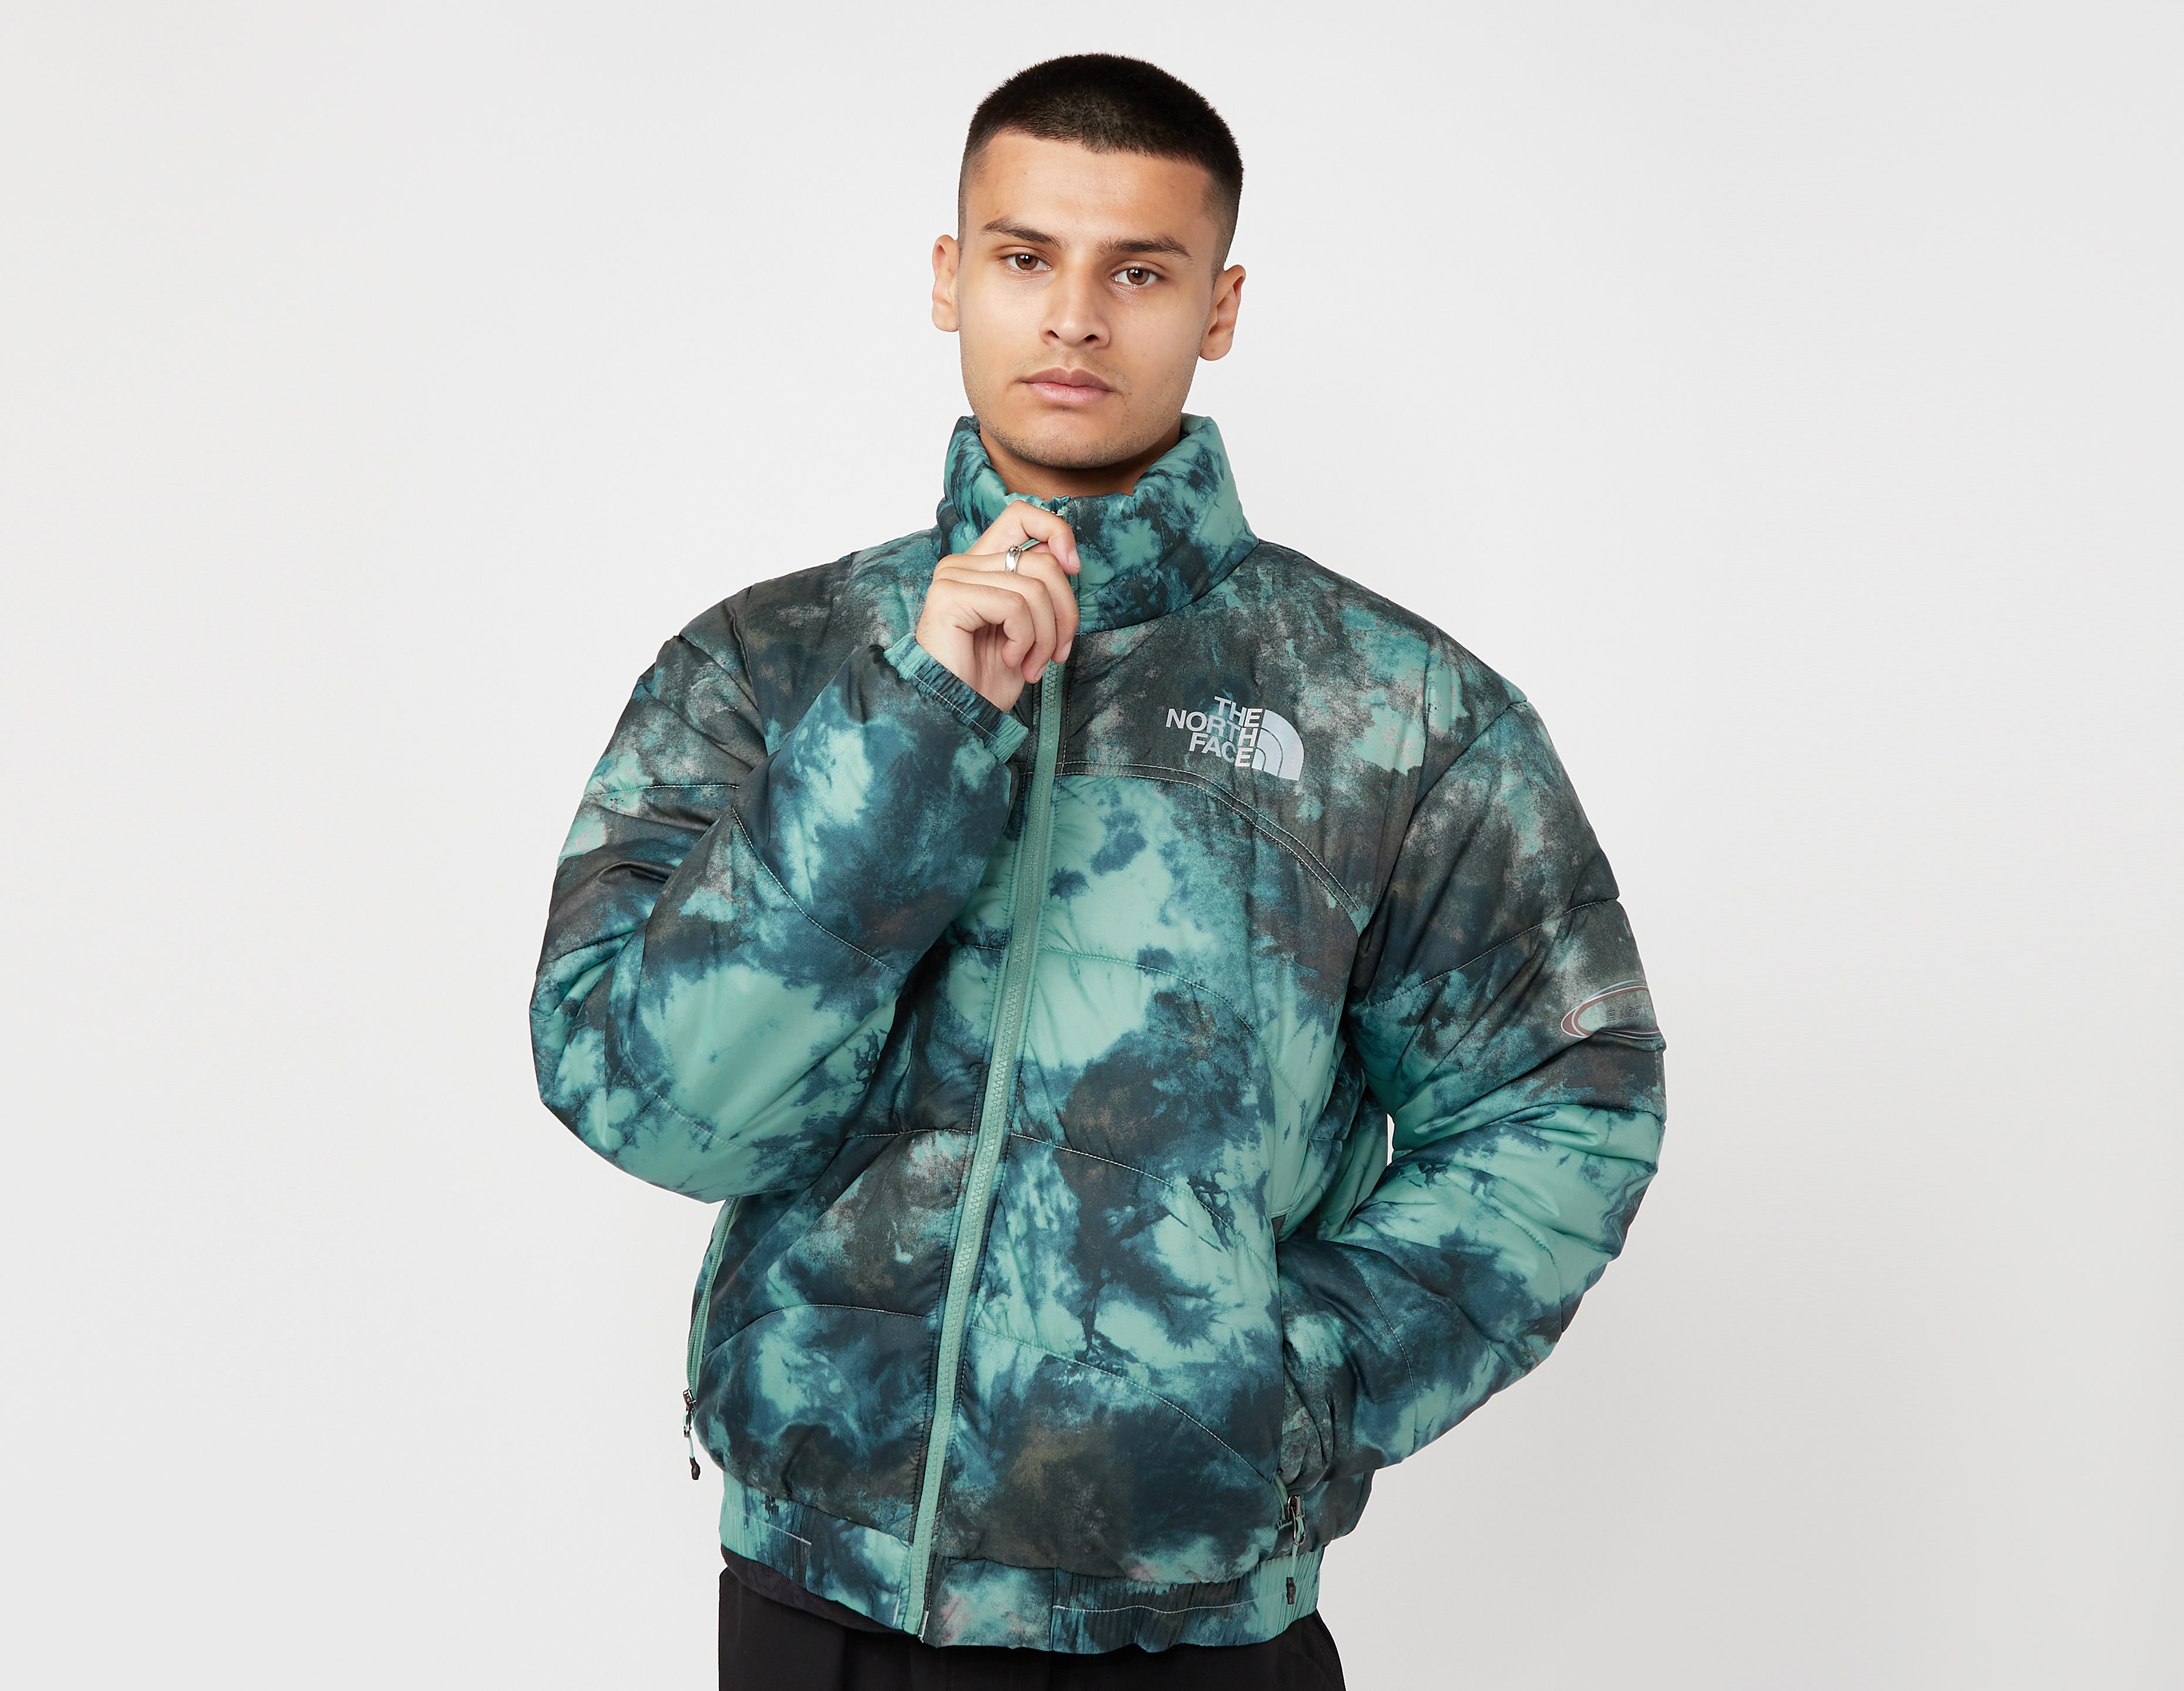 The North Face 2000 Printed Elements Jacket